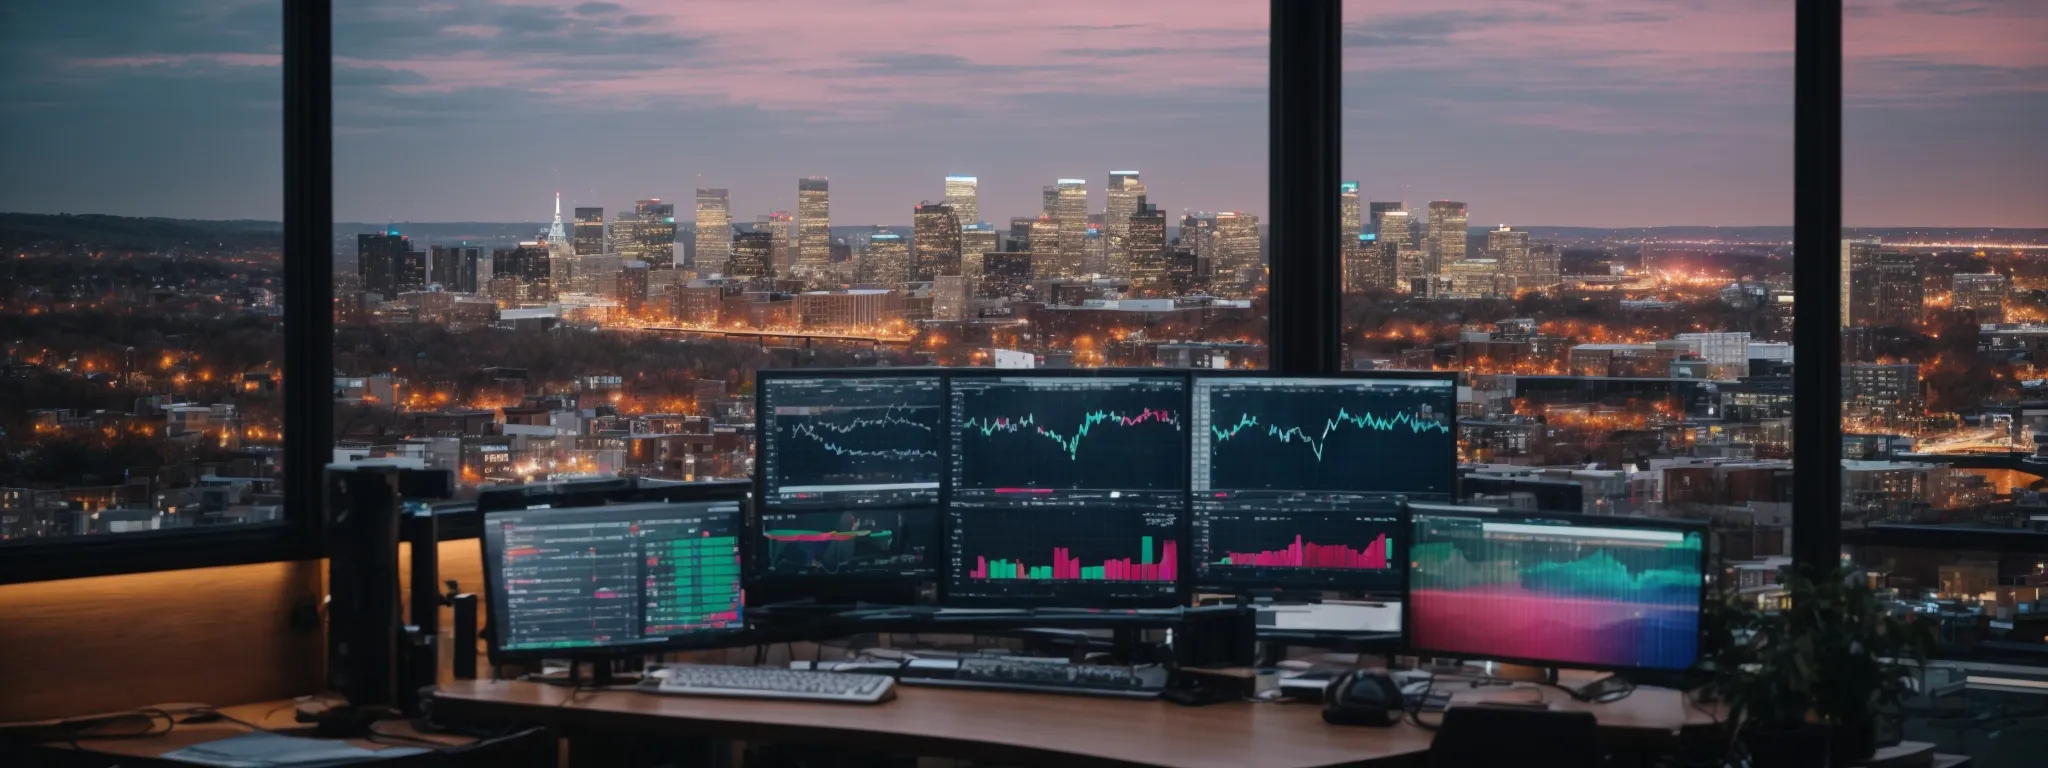 a computer screen displaying colorful graphs and seo analytics tools amidst an office overlooking a connecticut cityscape.